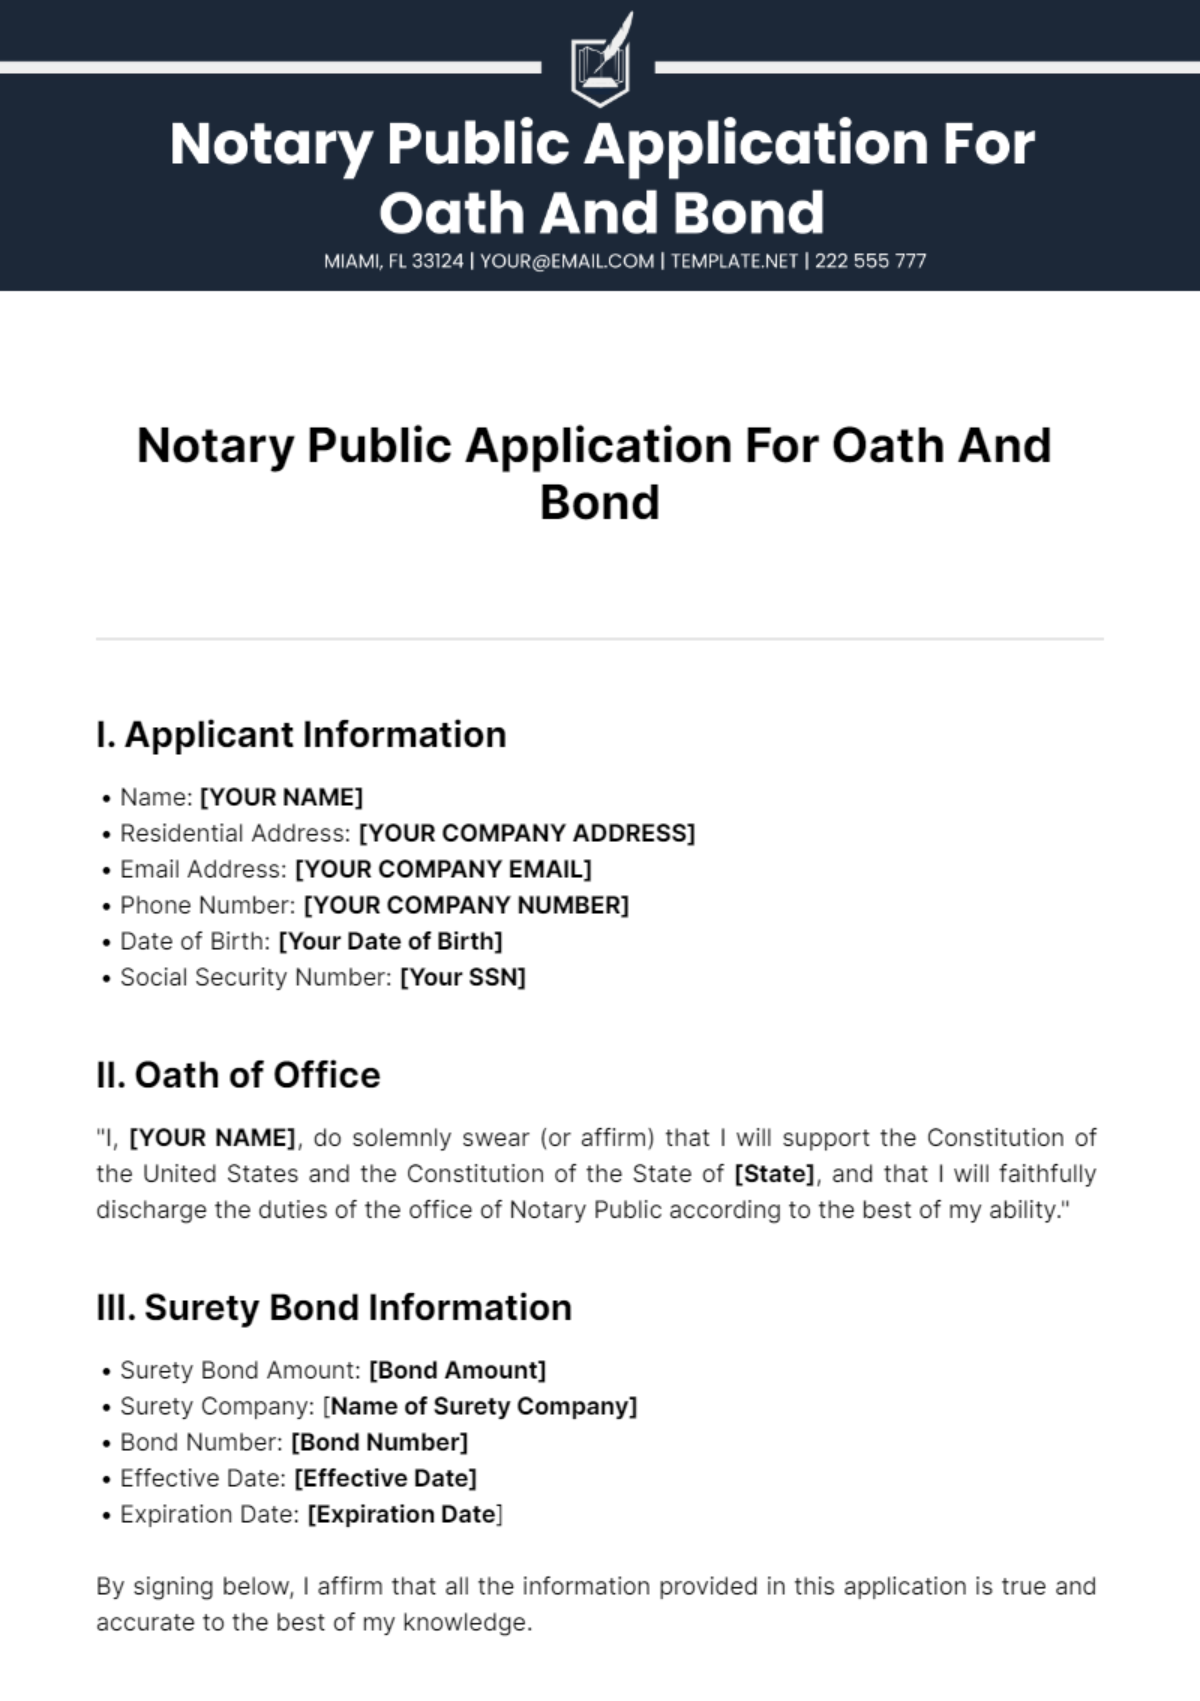 Free Notary Public Application For Oath And Bond Template